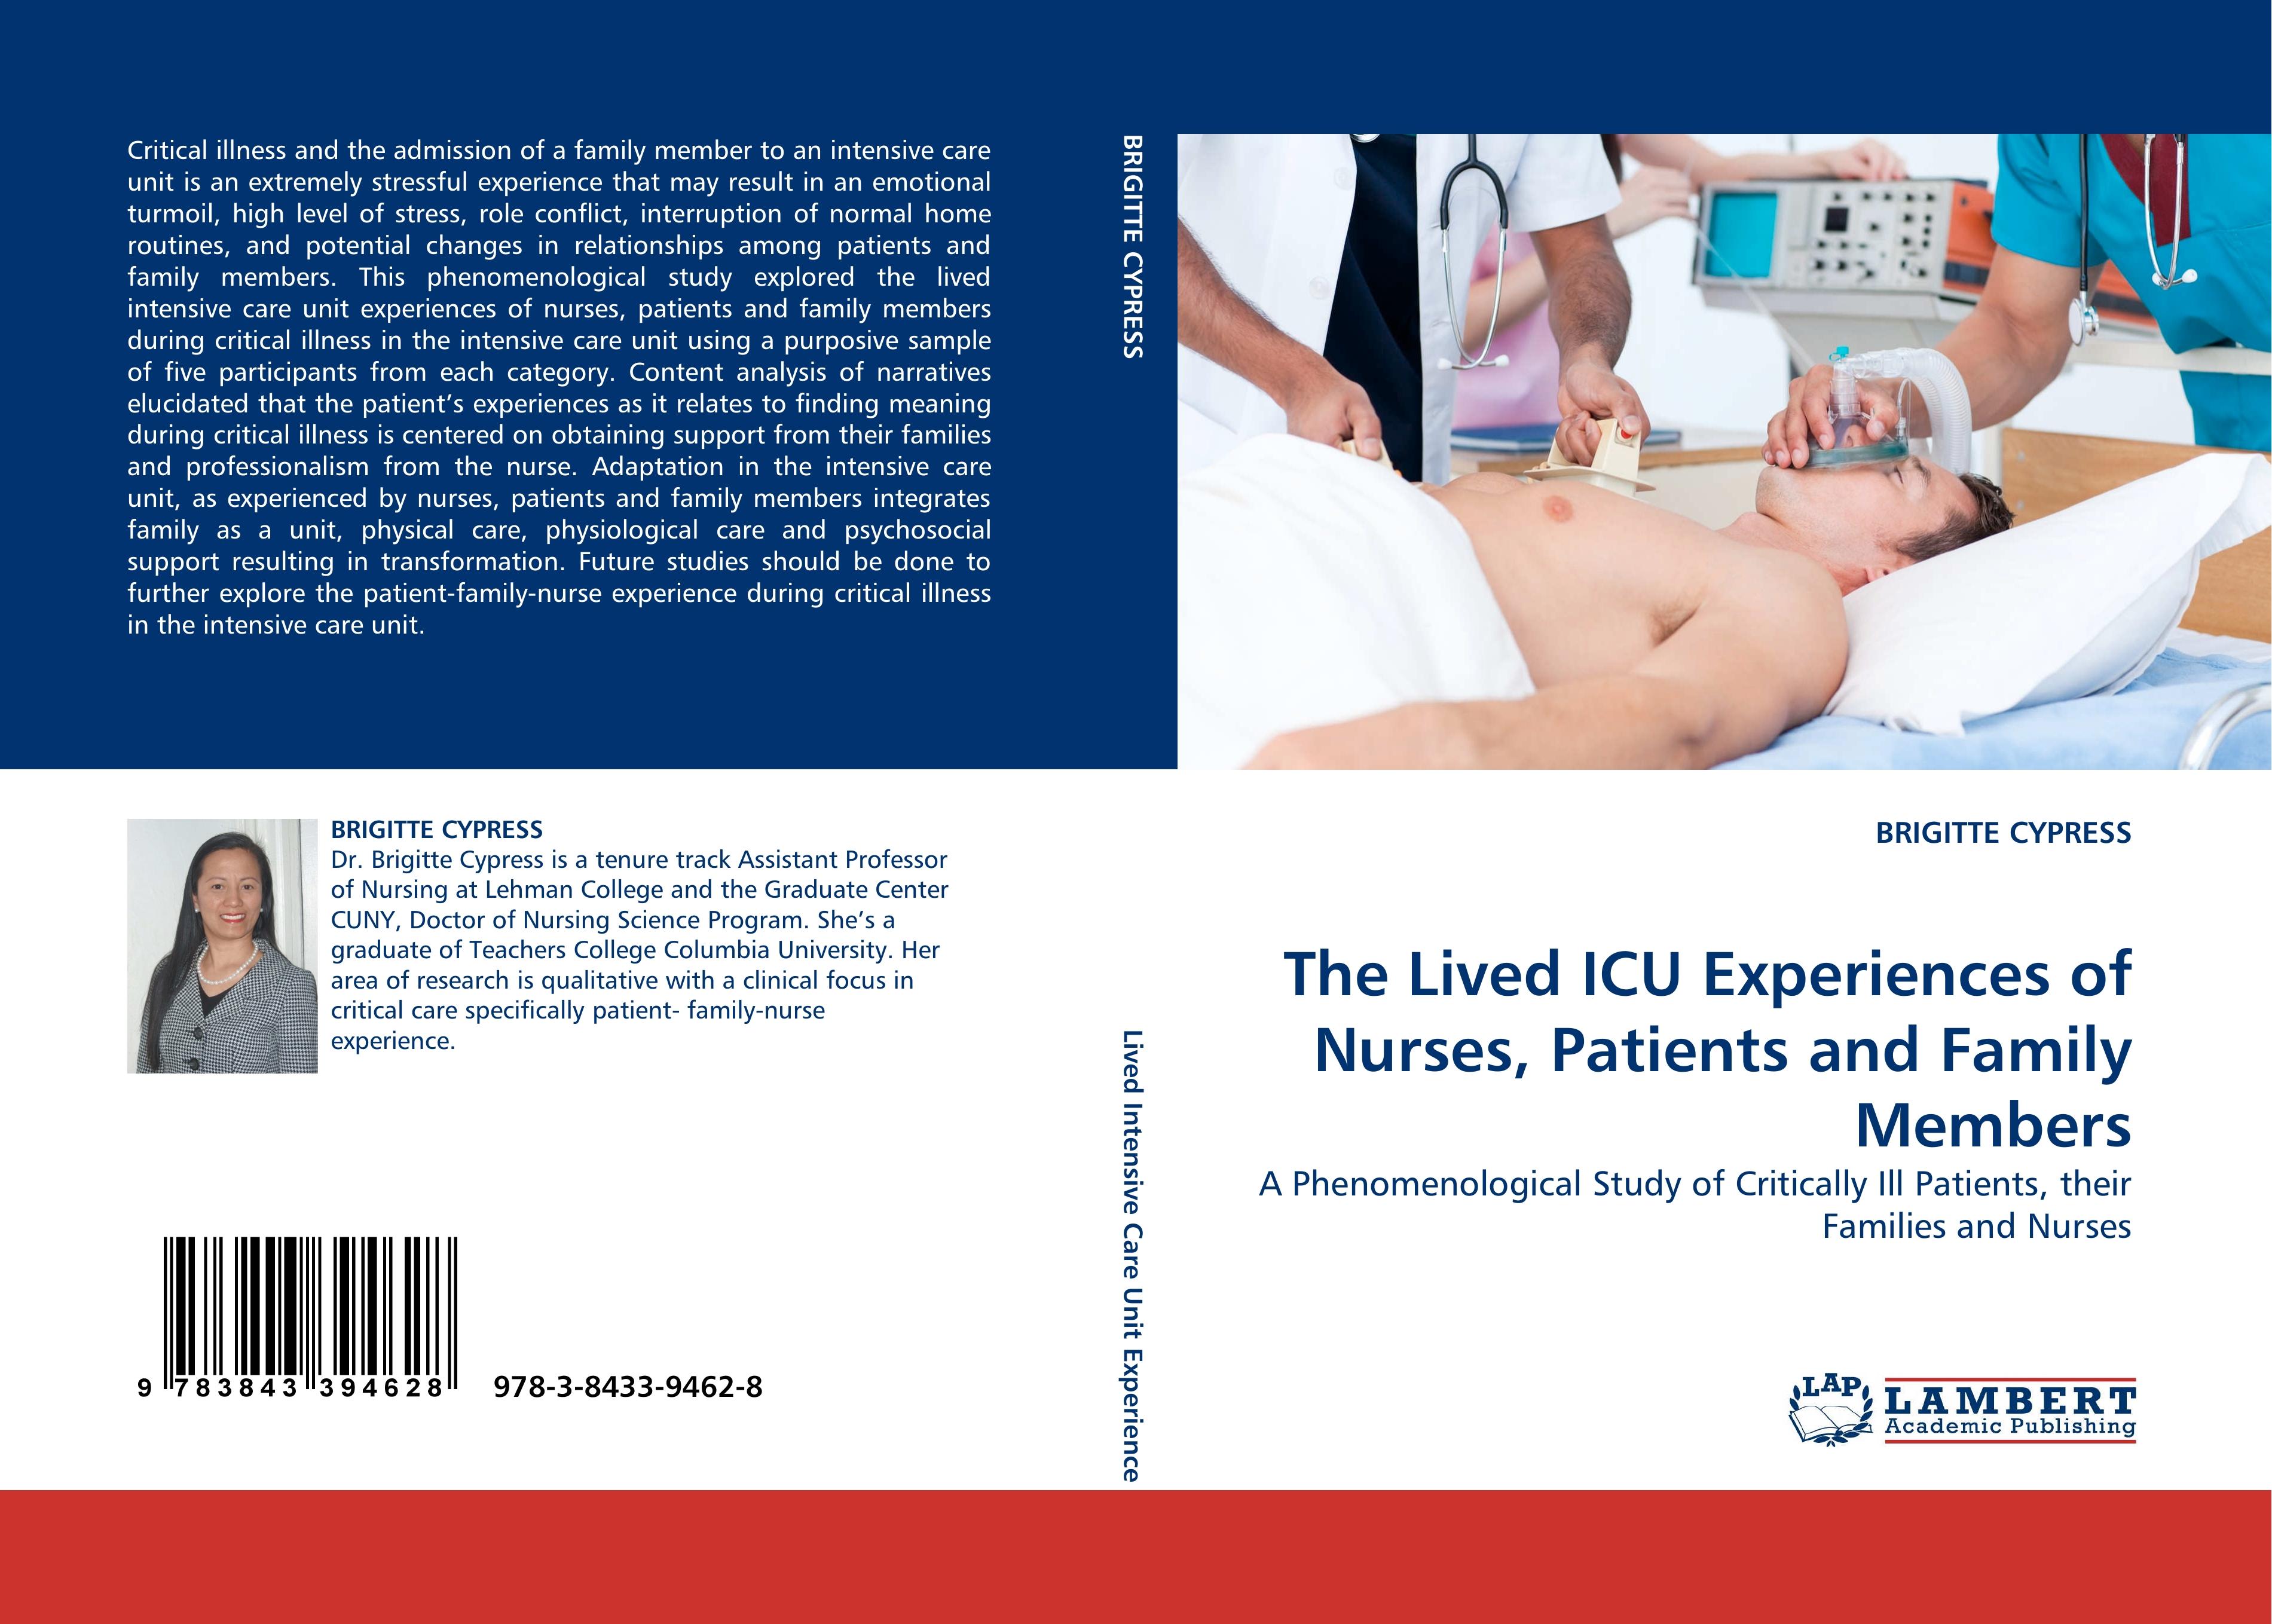 The Lived ICU Experiences of Nurses, Patients and Family Members - BRIGITTE CYPRESS